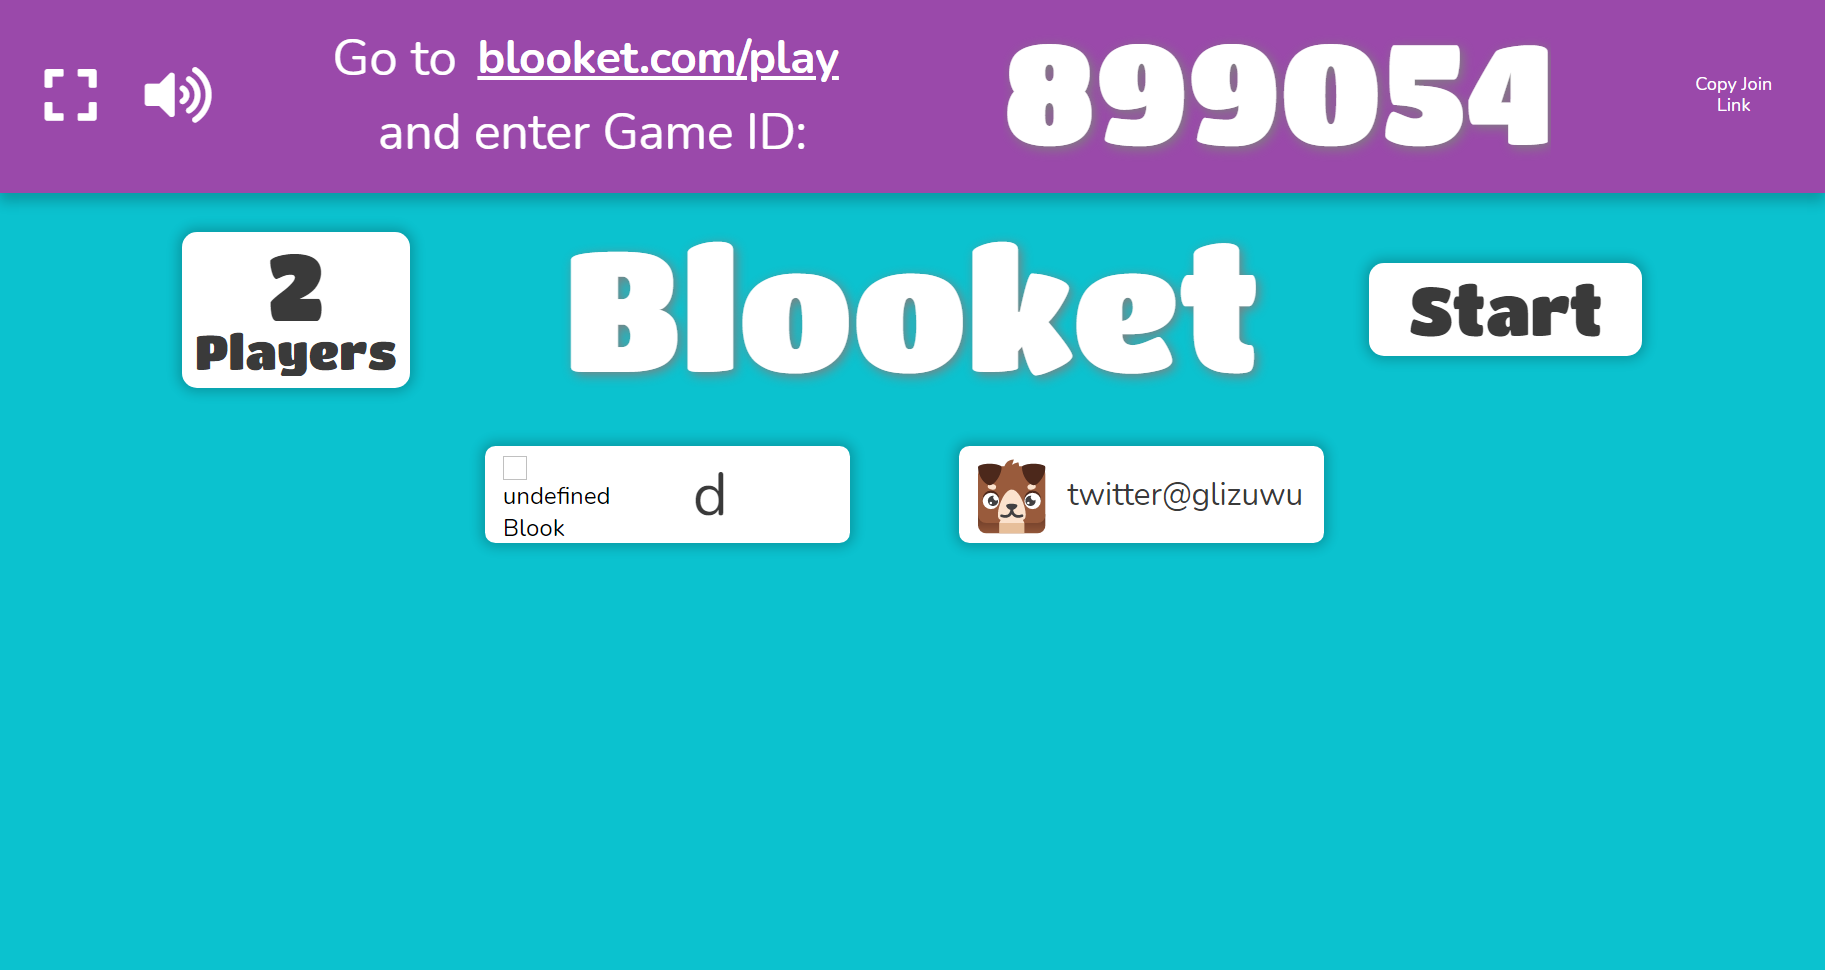 Blooket Game Codes: How To Join Blooket Live Game? - My Blog